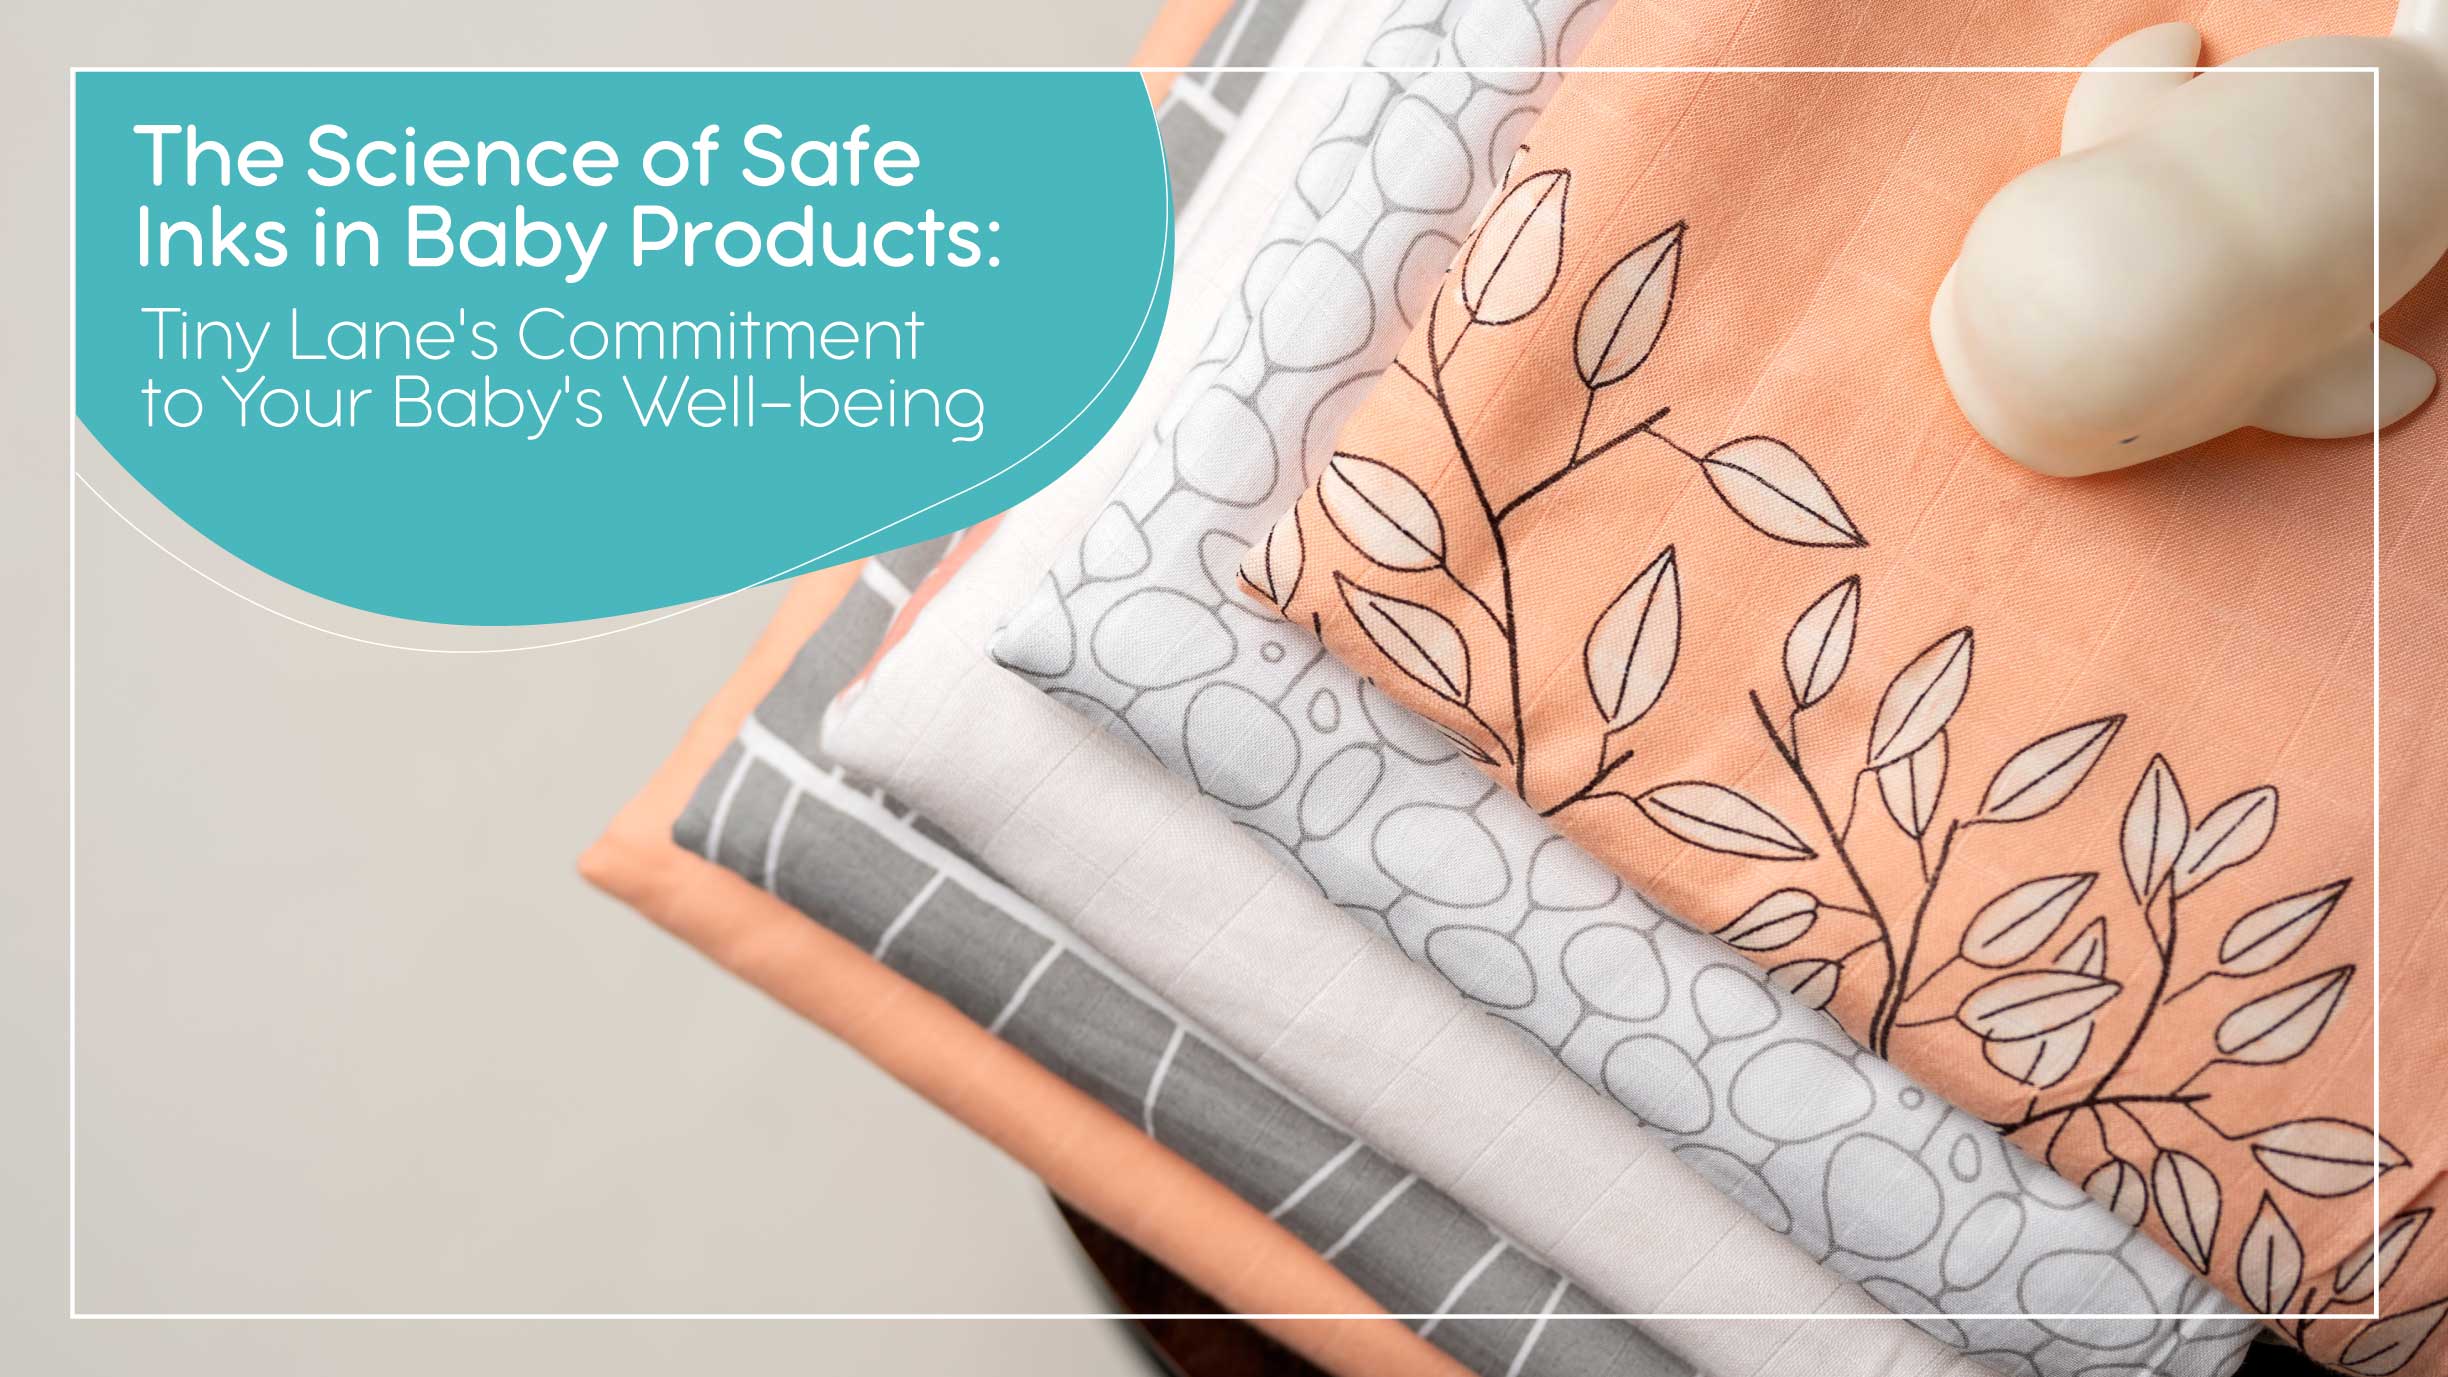 The Science of Safe Inks in Baby Products: Tiny Lane's Commitment to Your Baby's Well-being